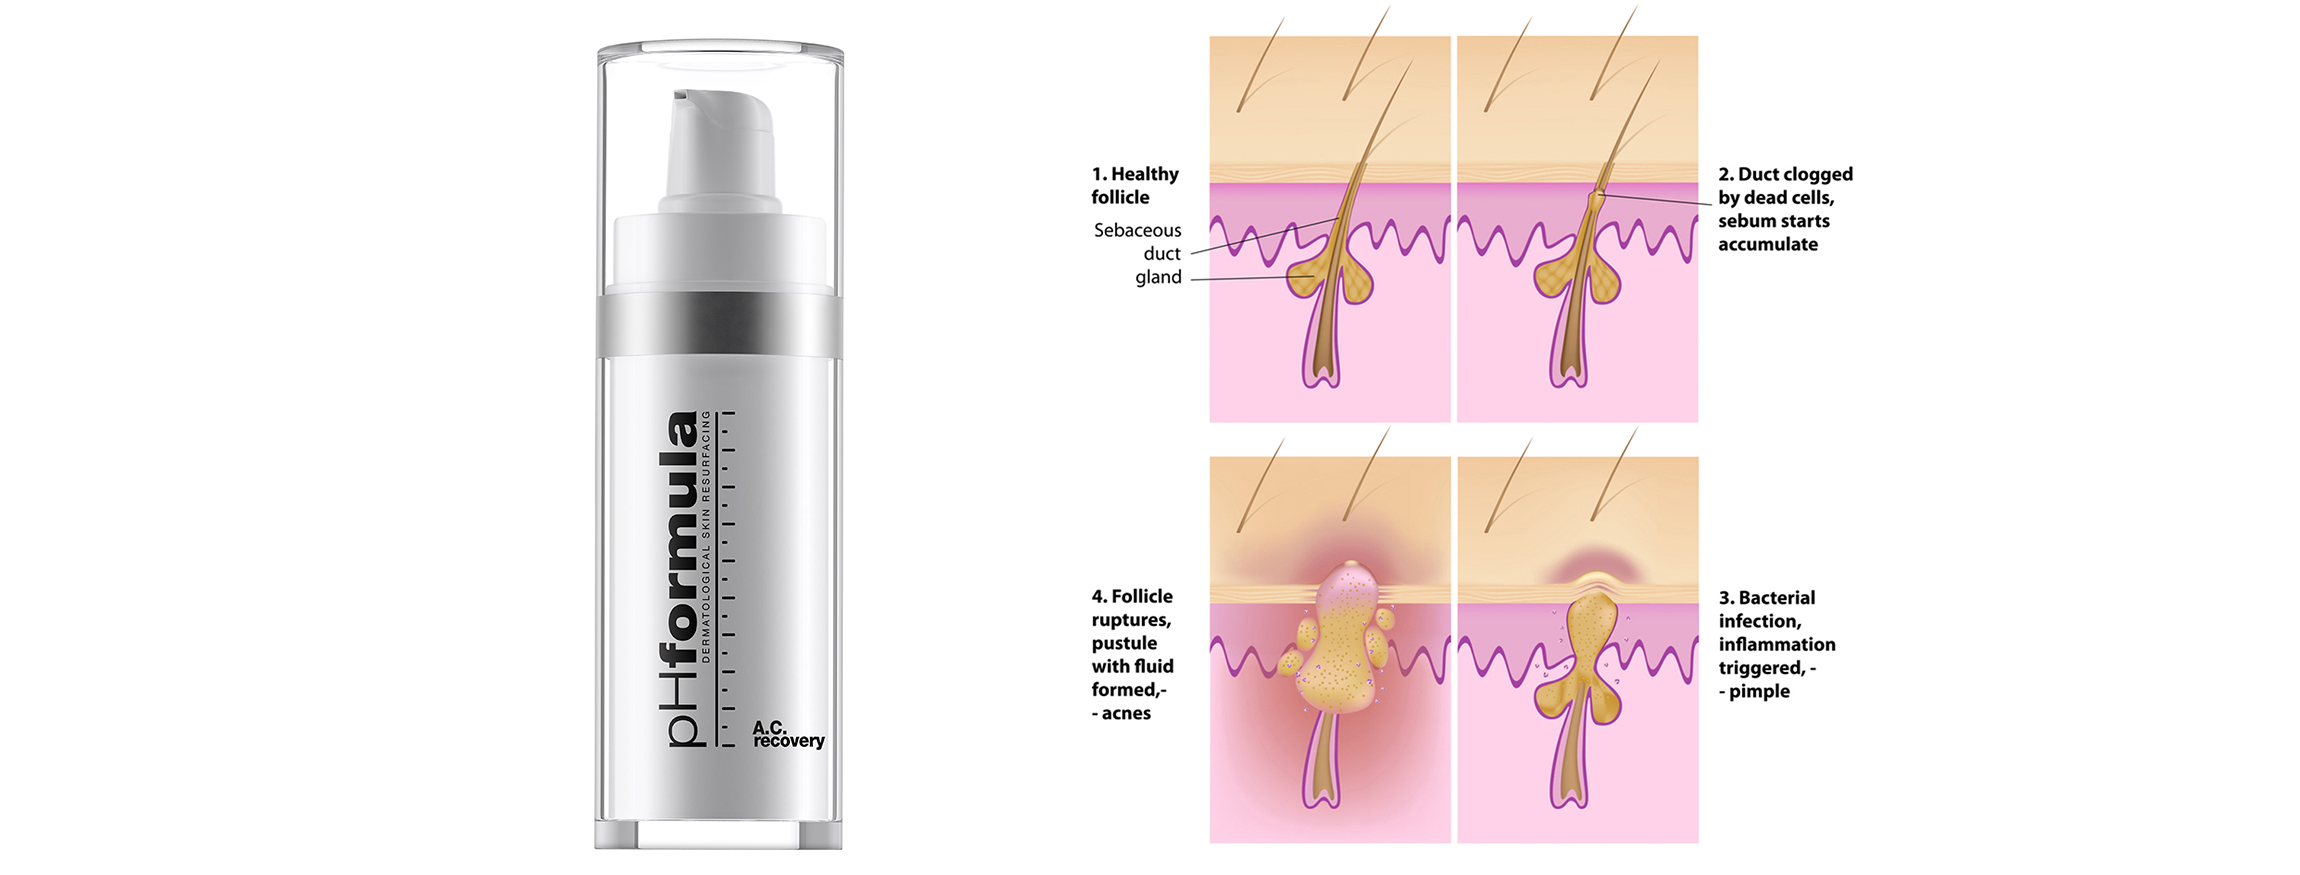 pHformula’s innovative products for treating acne